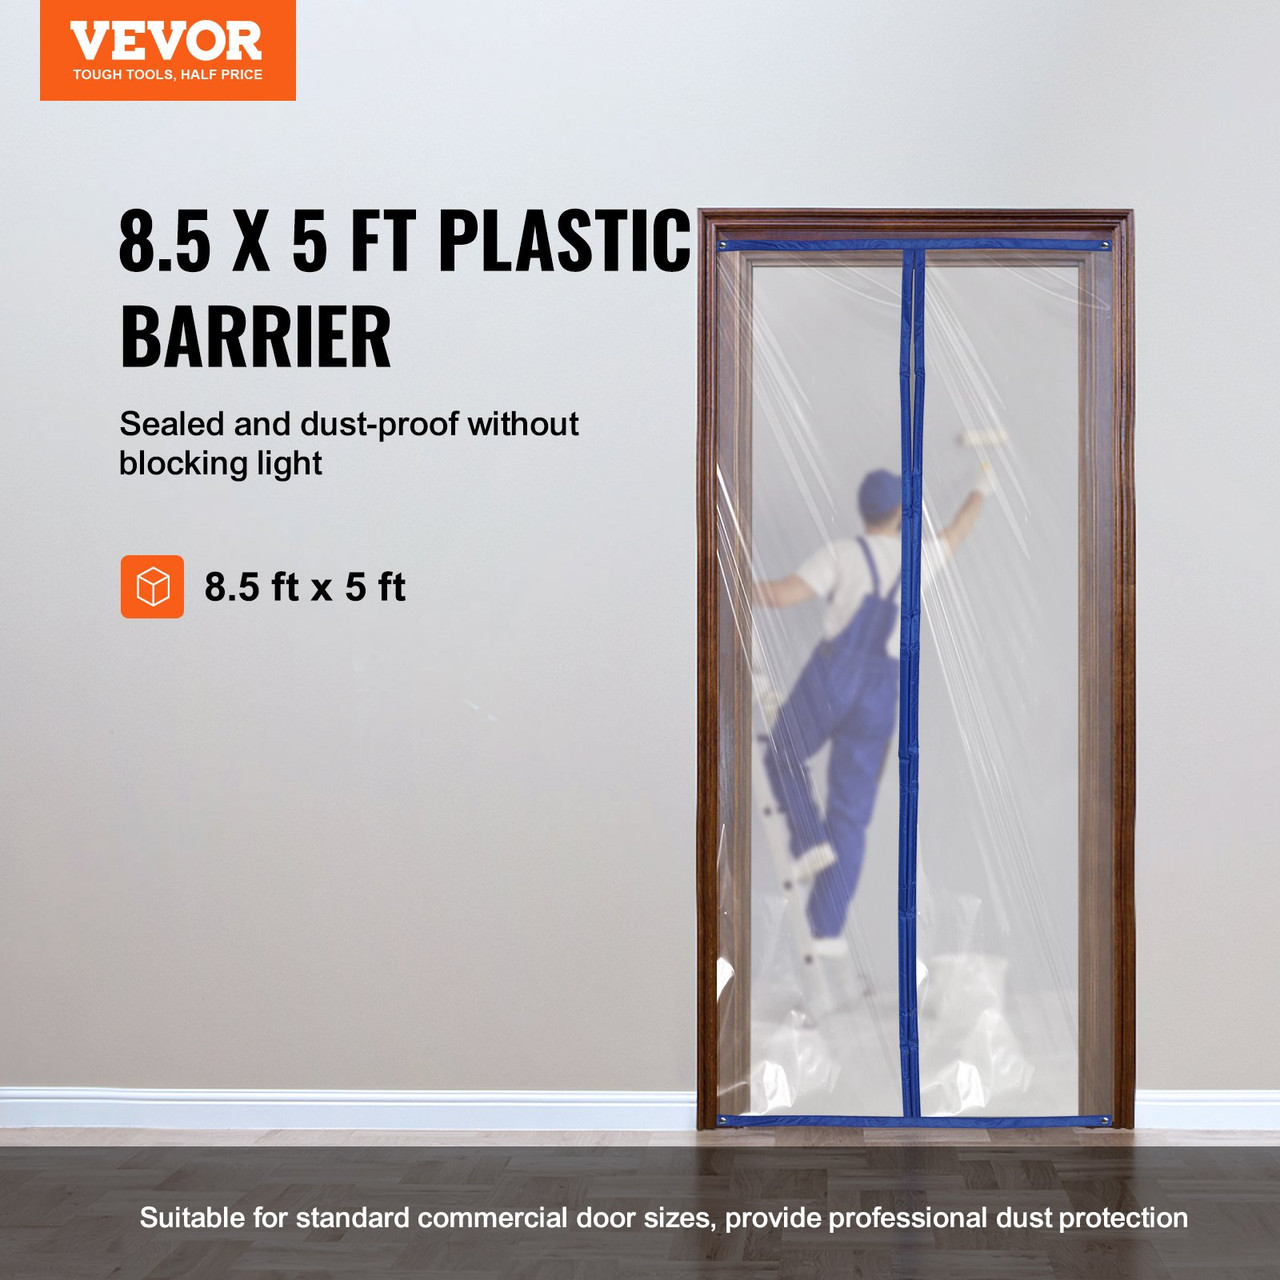 VEVOR Dust Barrier, 8.5 x 5 Ft Dust Barrier Door Kit, with Magnetic Self-Closing Zipper, PE Construction Door Cover for Dust Containment, Reusable Dust Protection Wall for Living Room Bathroom Remodel